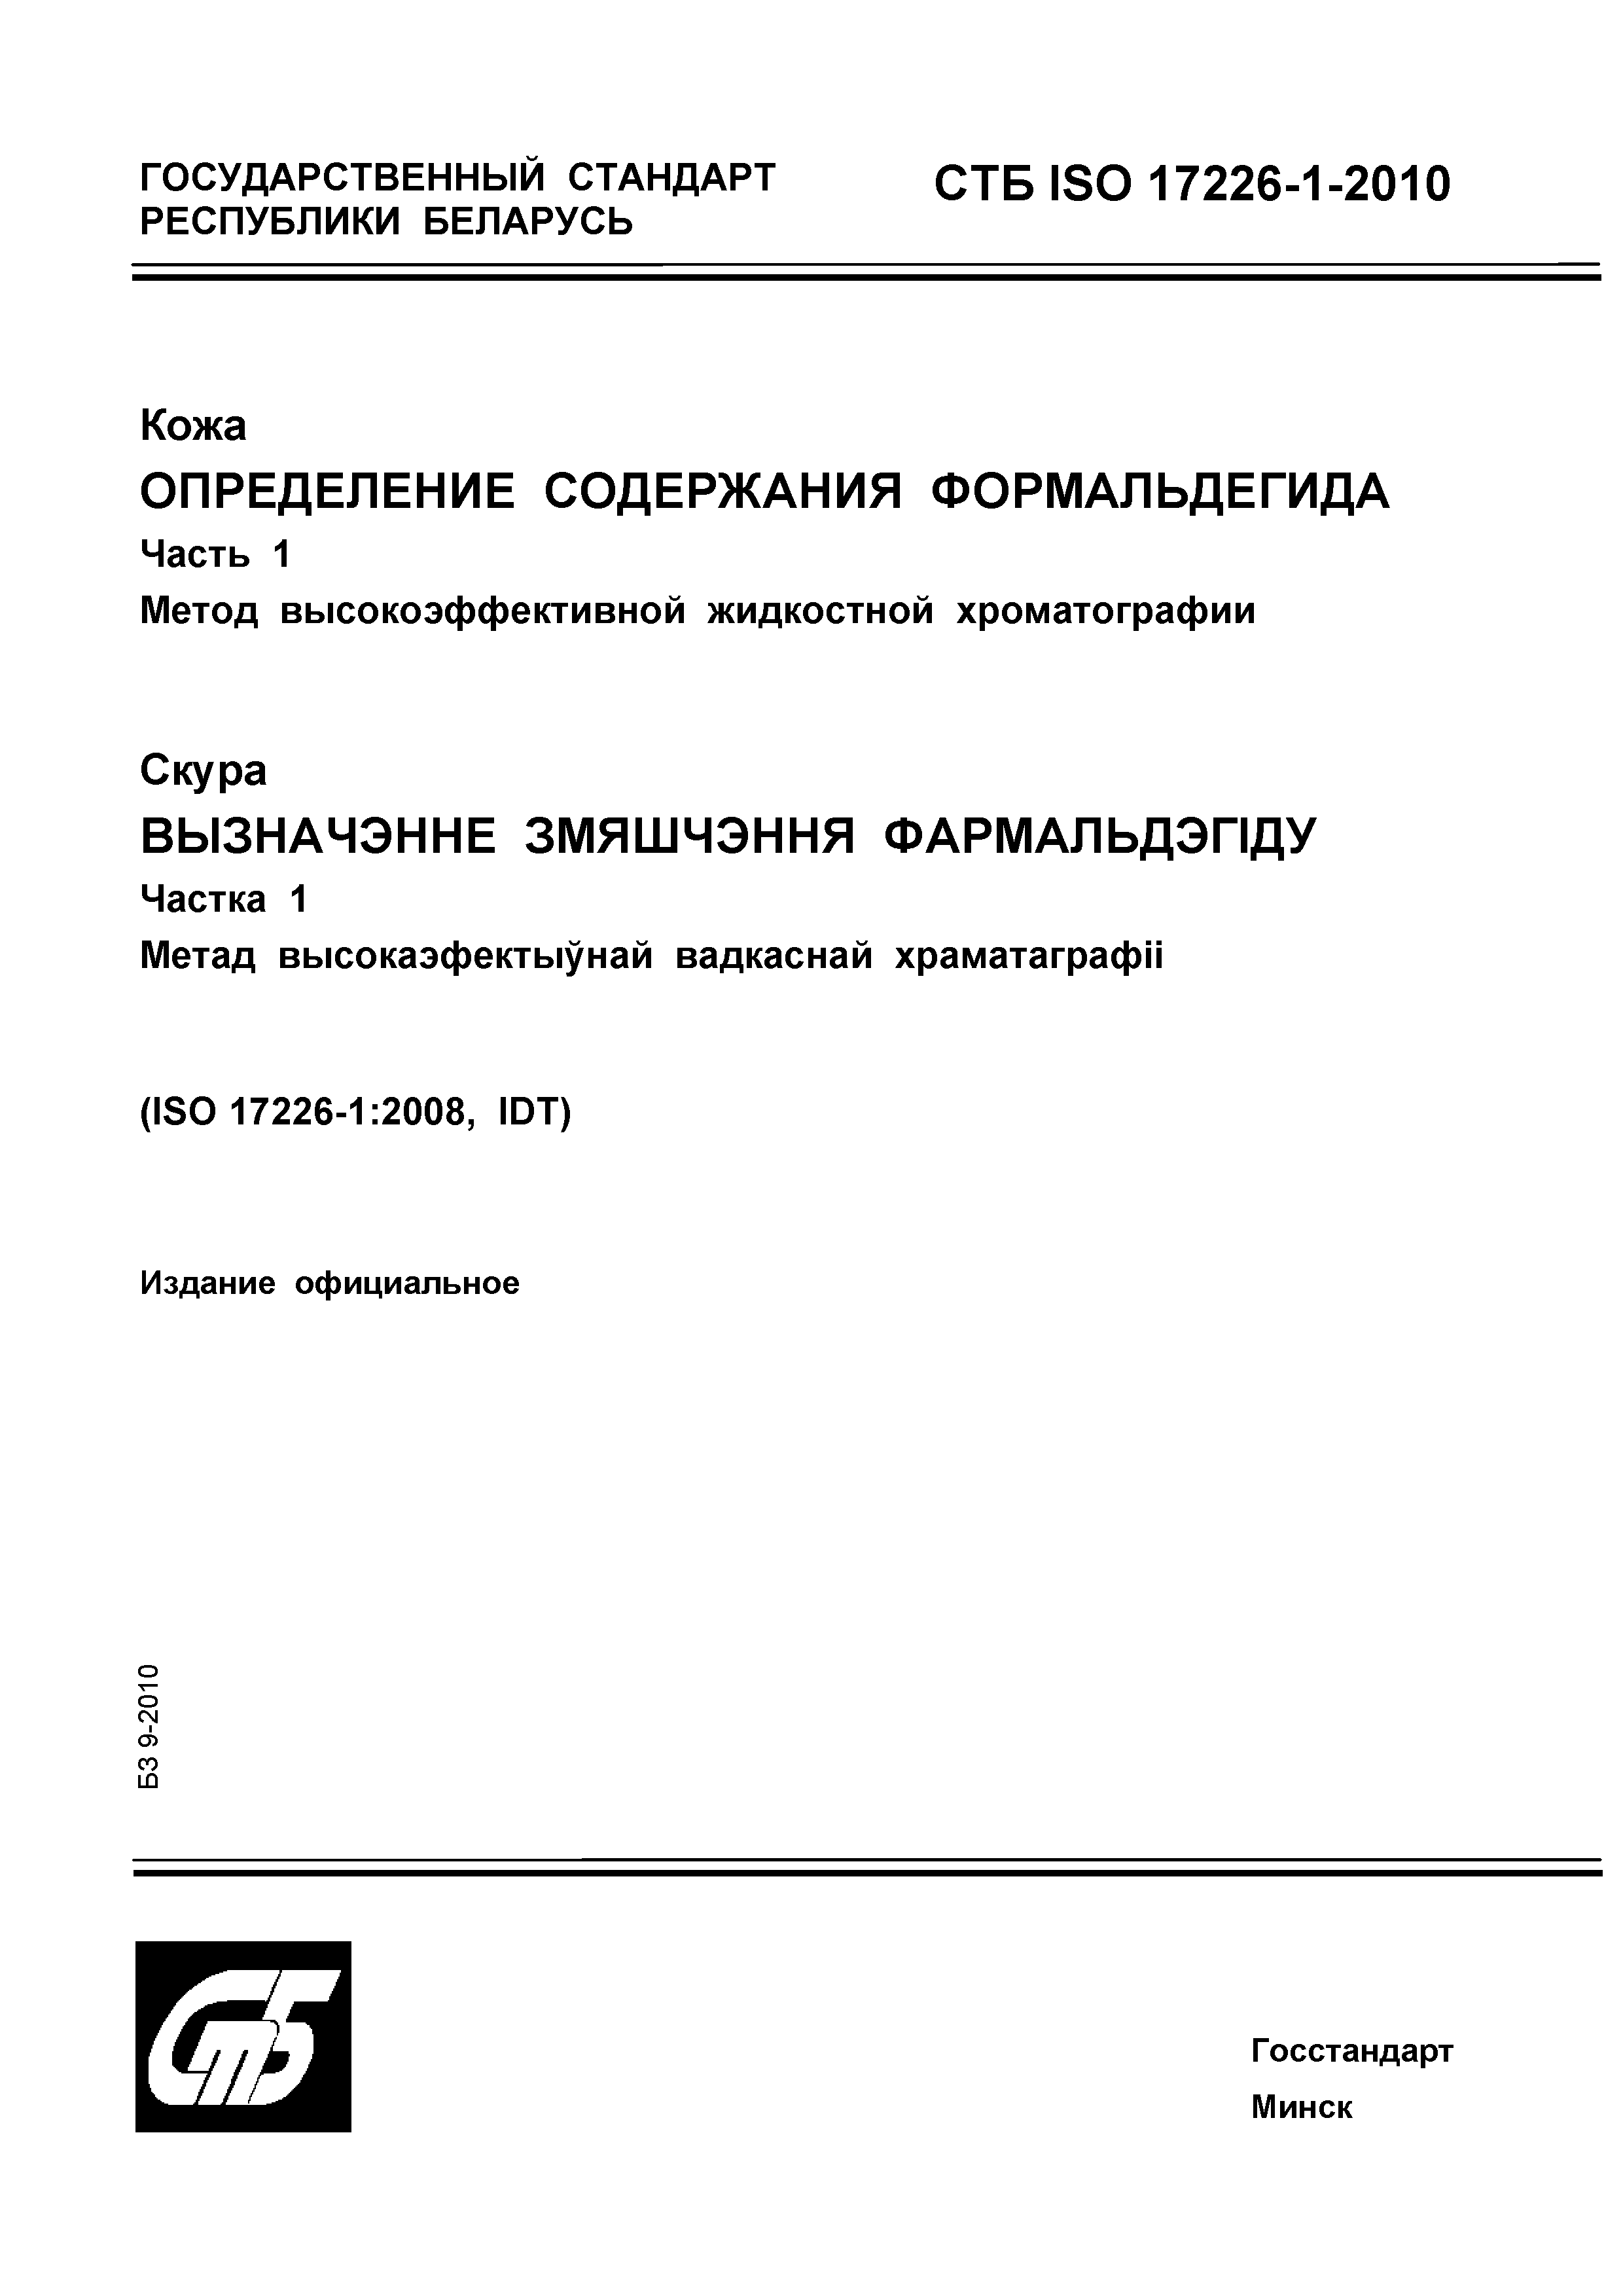 СТБ ISO 17226-1-2010